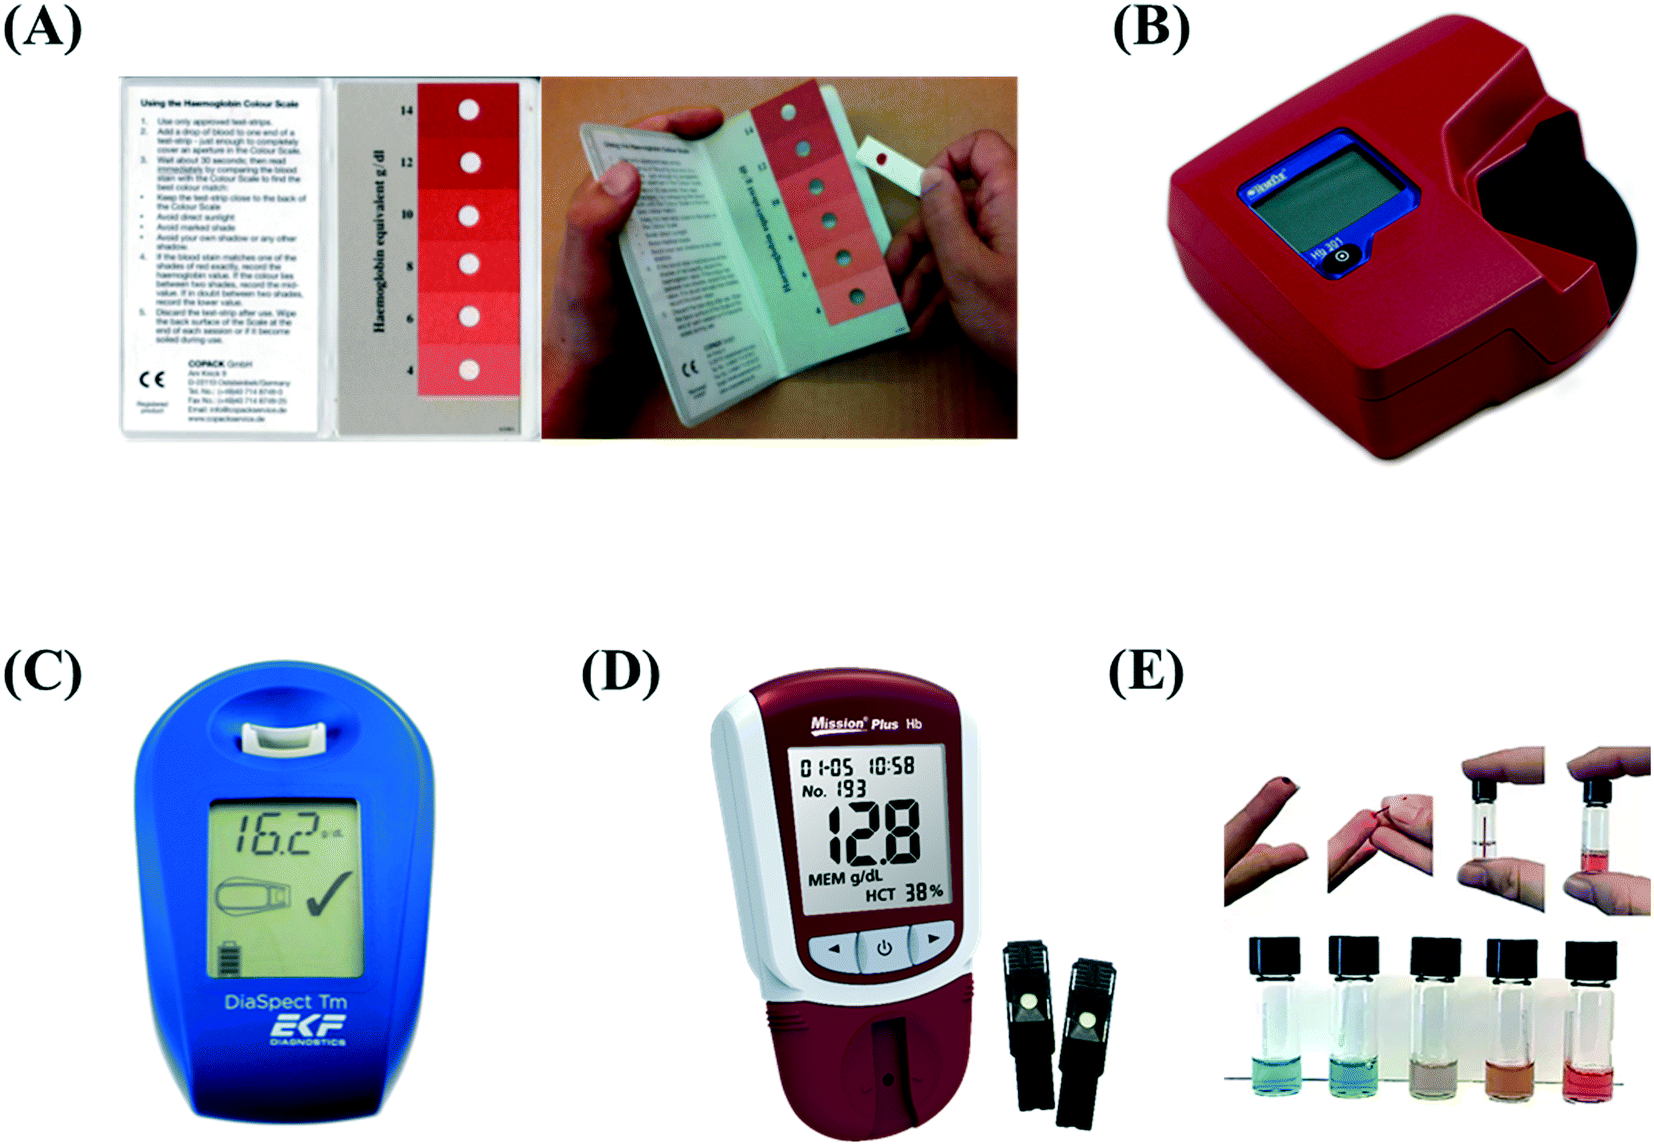 Emerging point-of-care technologies for anemia detection - Lab on a Chip  (RSC Publishing) DOI:10.1039/D0LC01235A